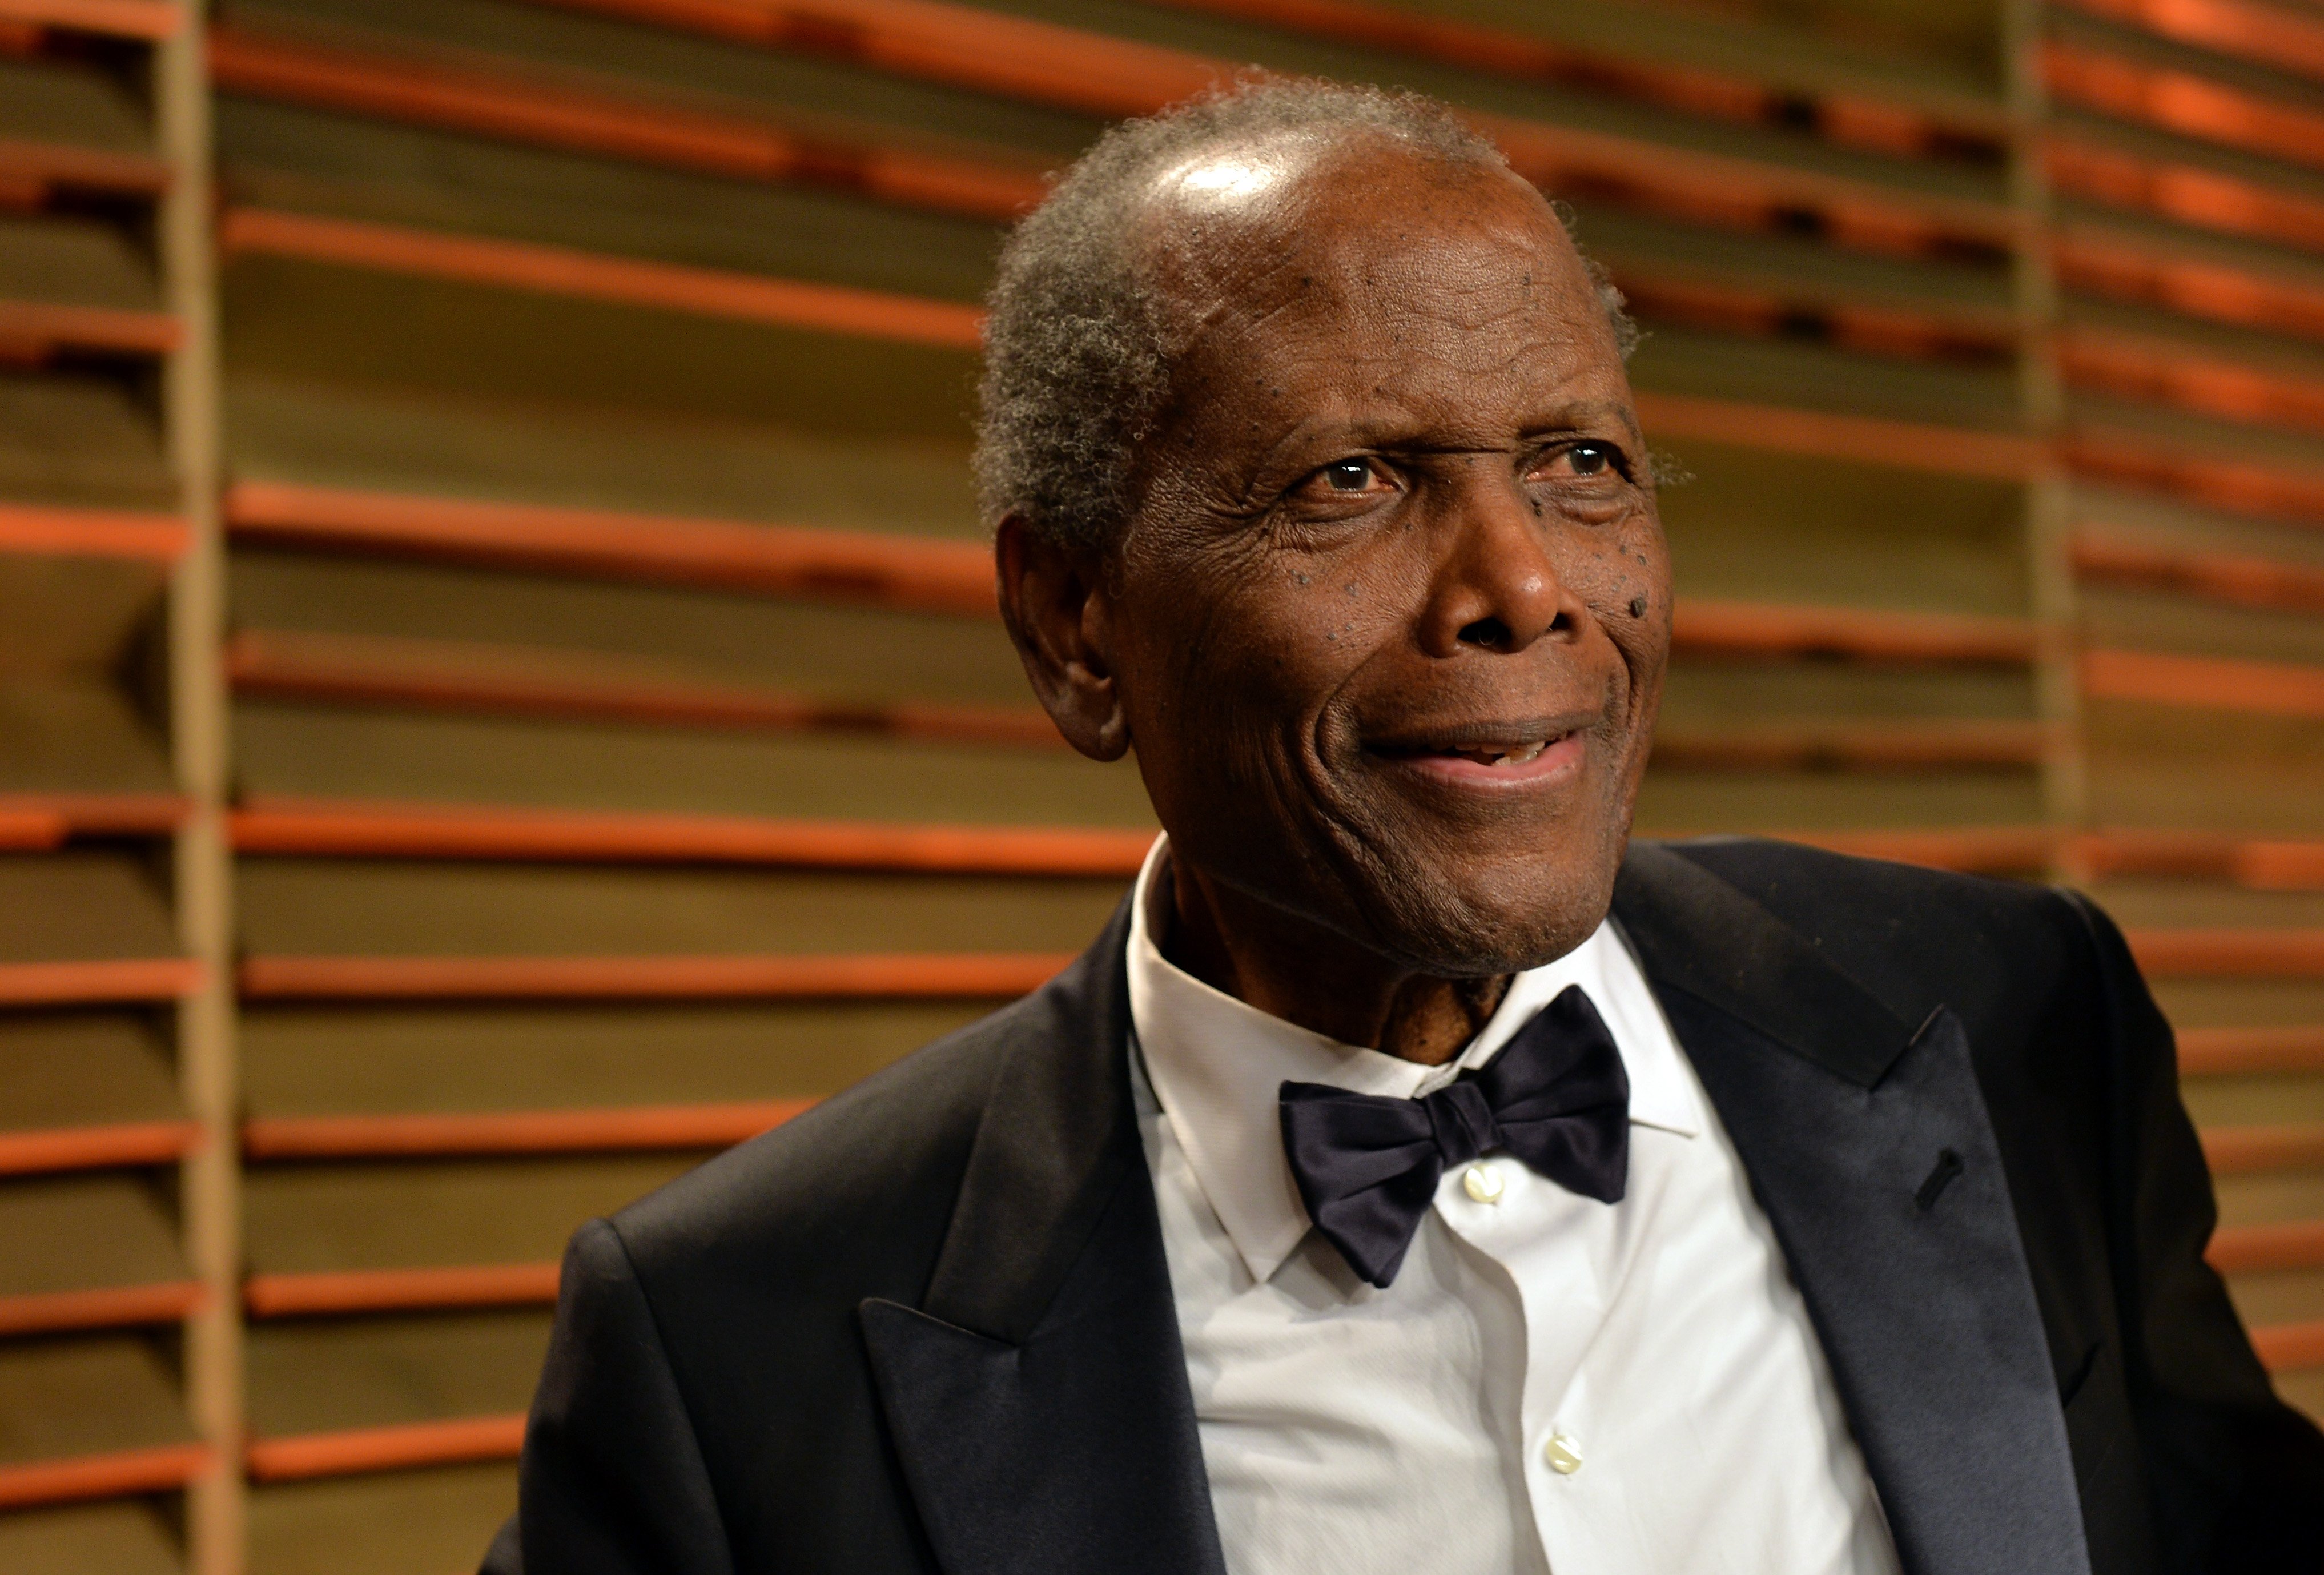 Sidney Poitier attends the 2014 Vanity Fair Oscars on March 2, 2014. |  Photo: Getty Images